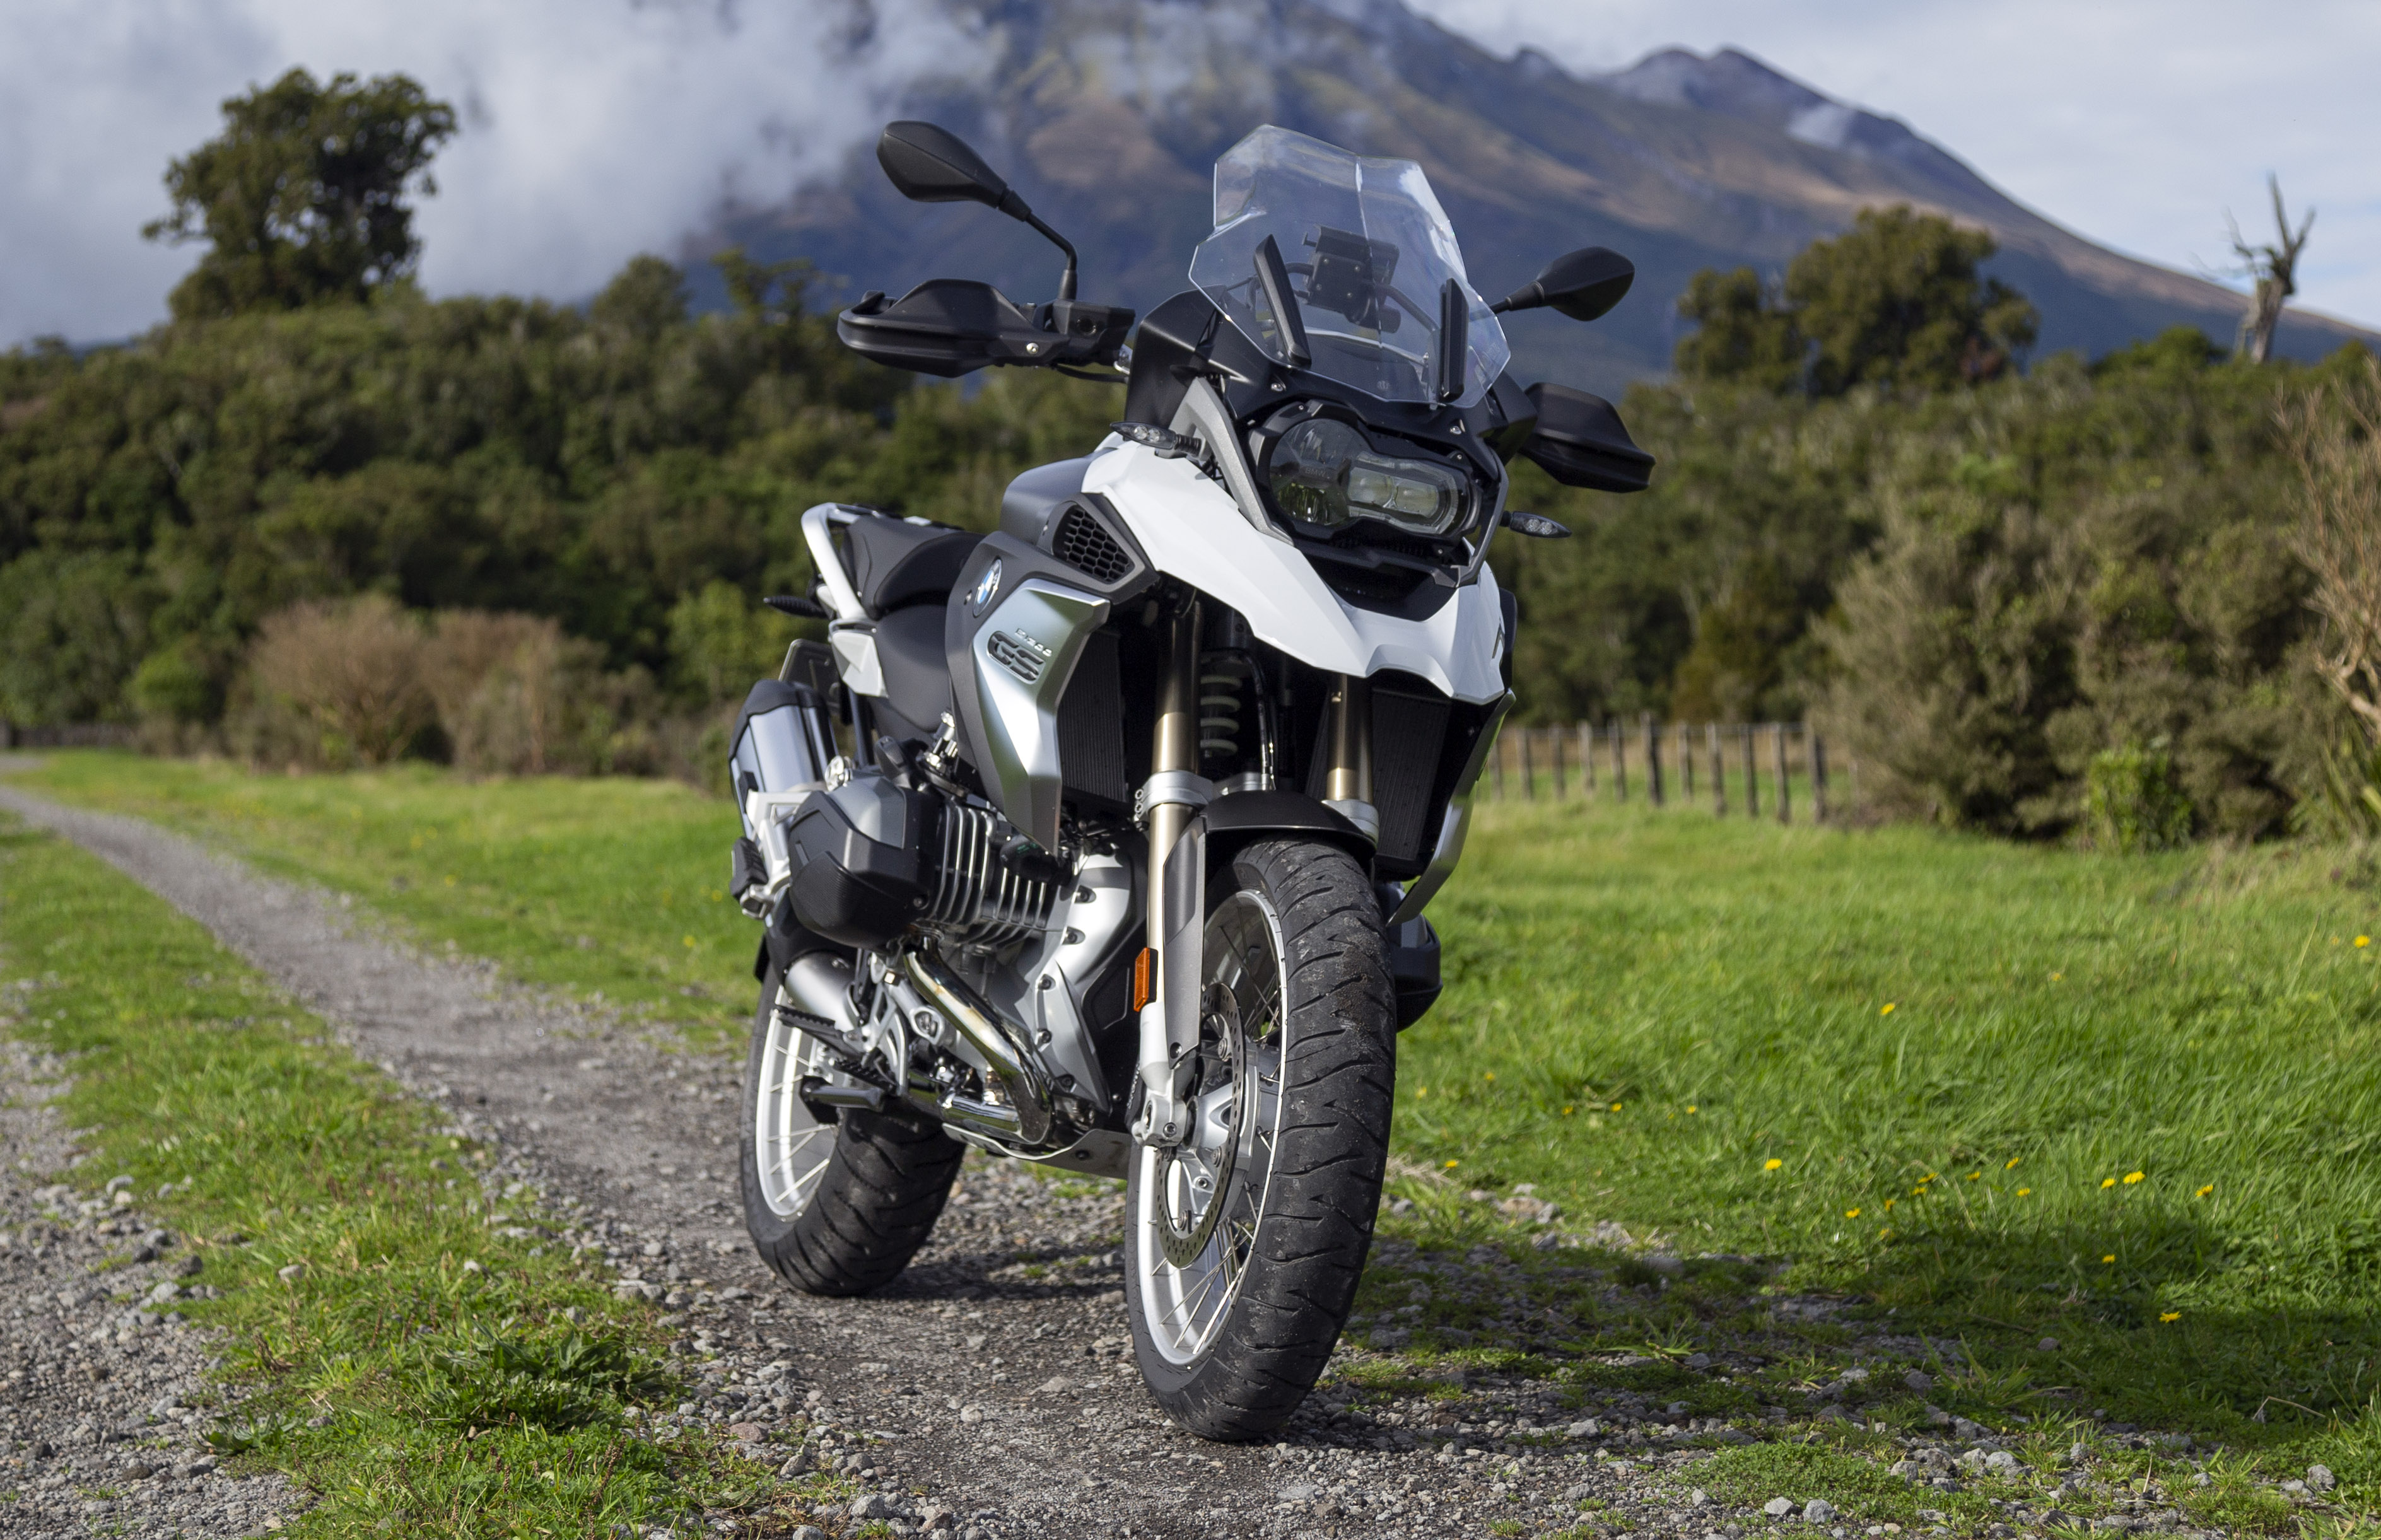 front view, bike, bmw, motorcycles, motorcycle, bmw r 1200 gs